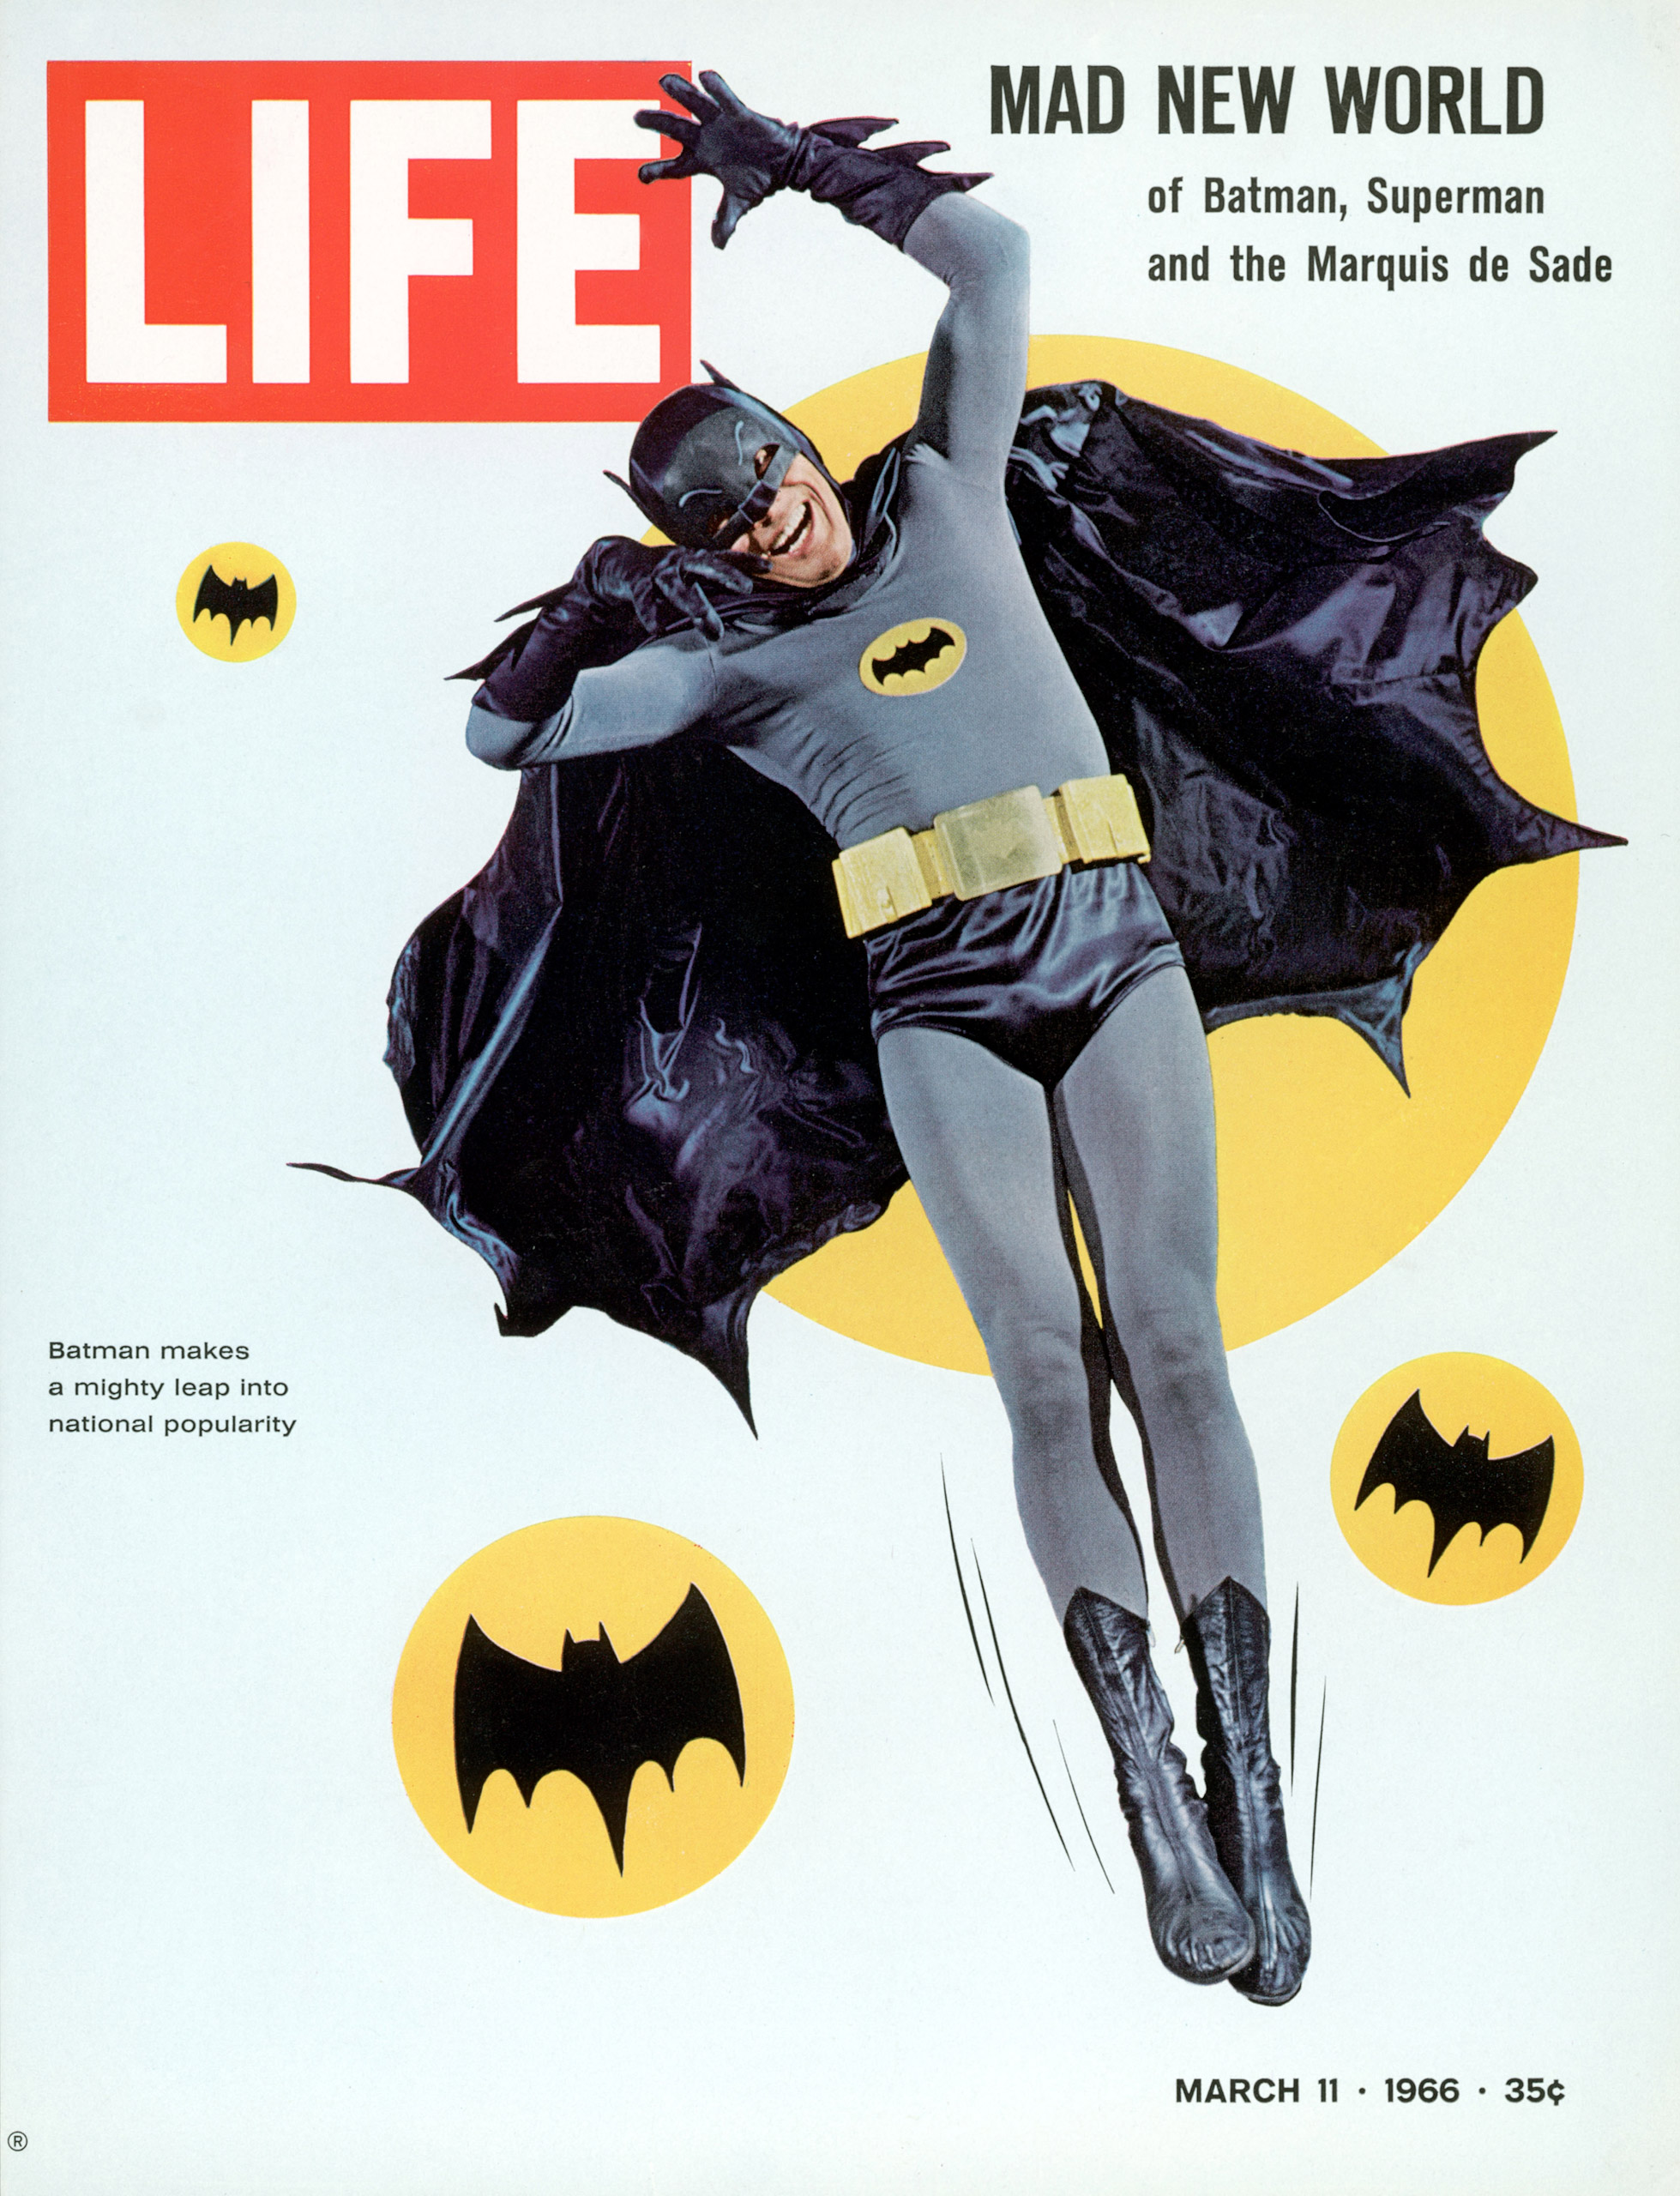 Batman on the cover of LIFE magazine, 1966